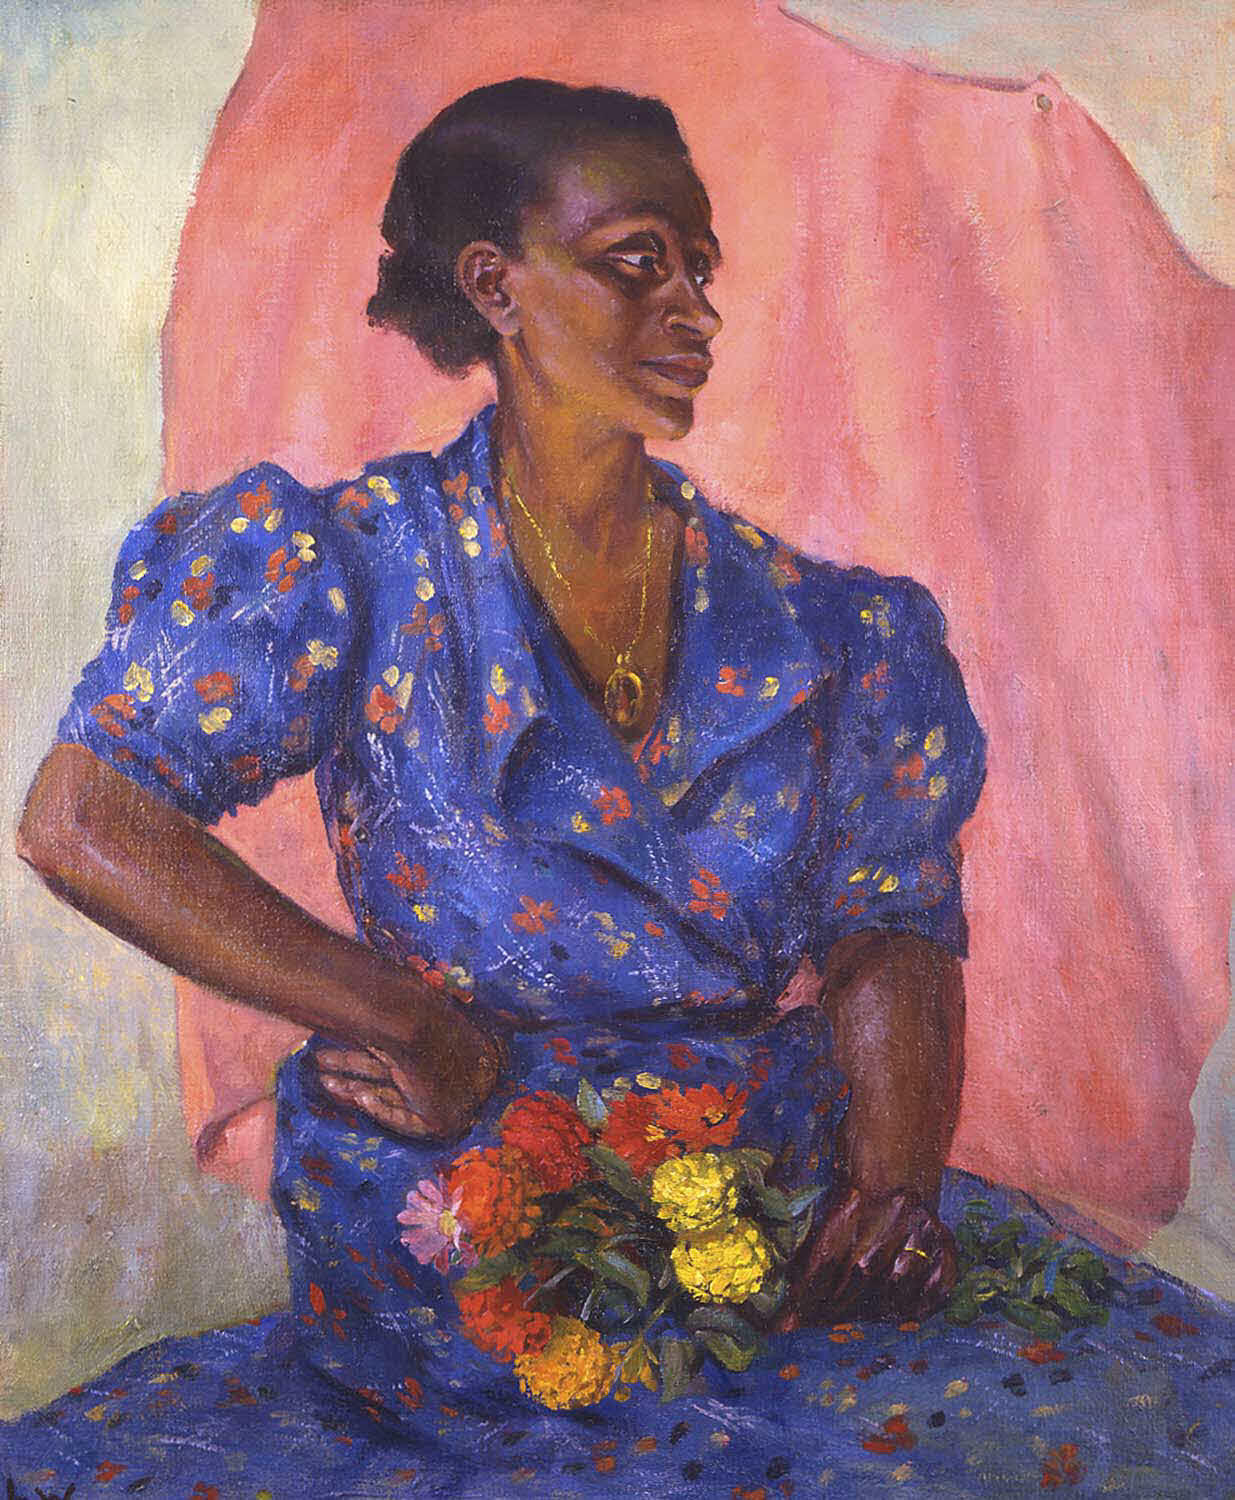 Woman with Bouquet by Laura Wheeler Waring - ca. 1940 - 76.2 x 63.5 cm Brooklyn Museum